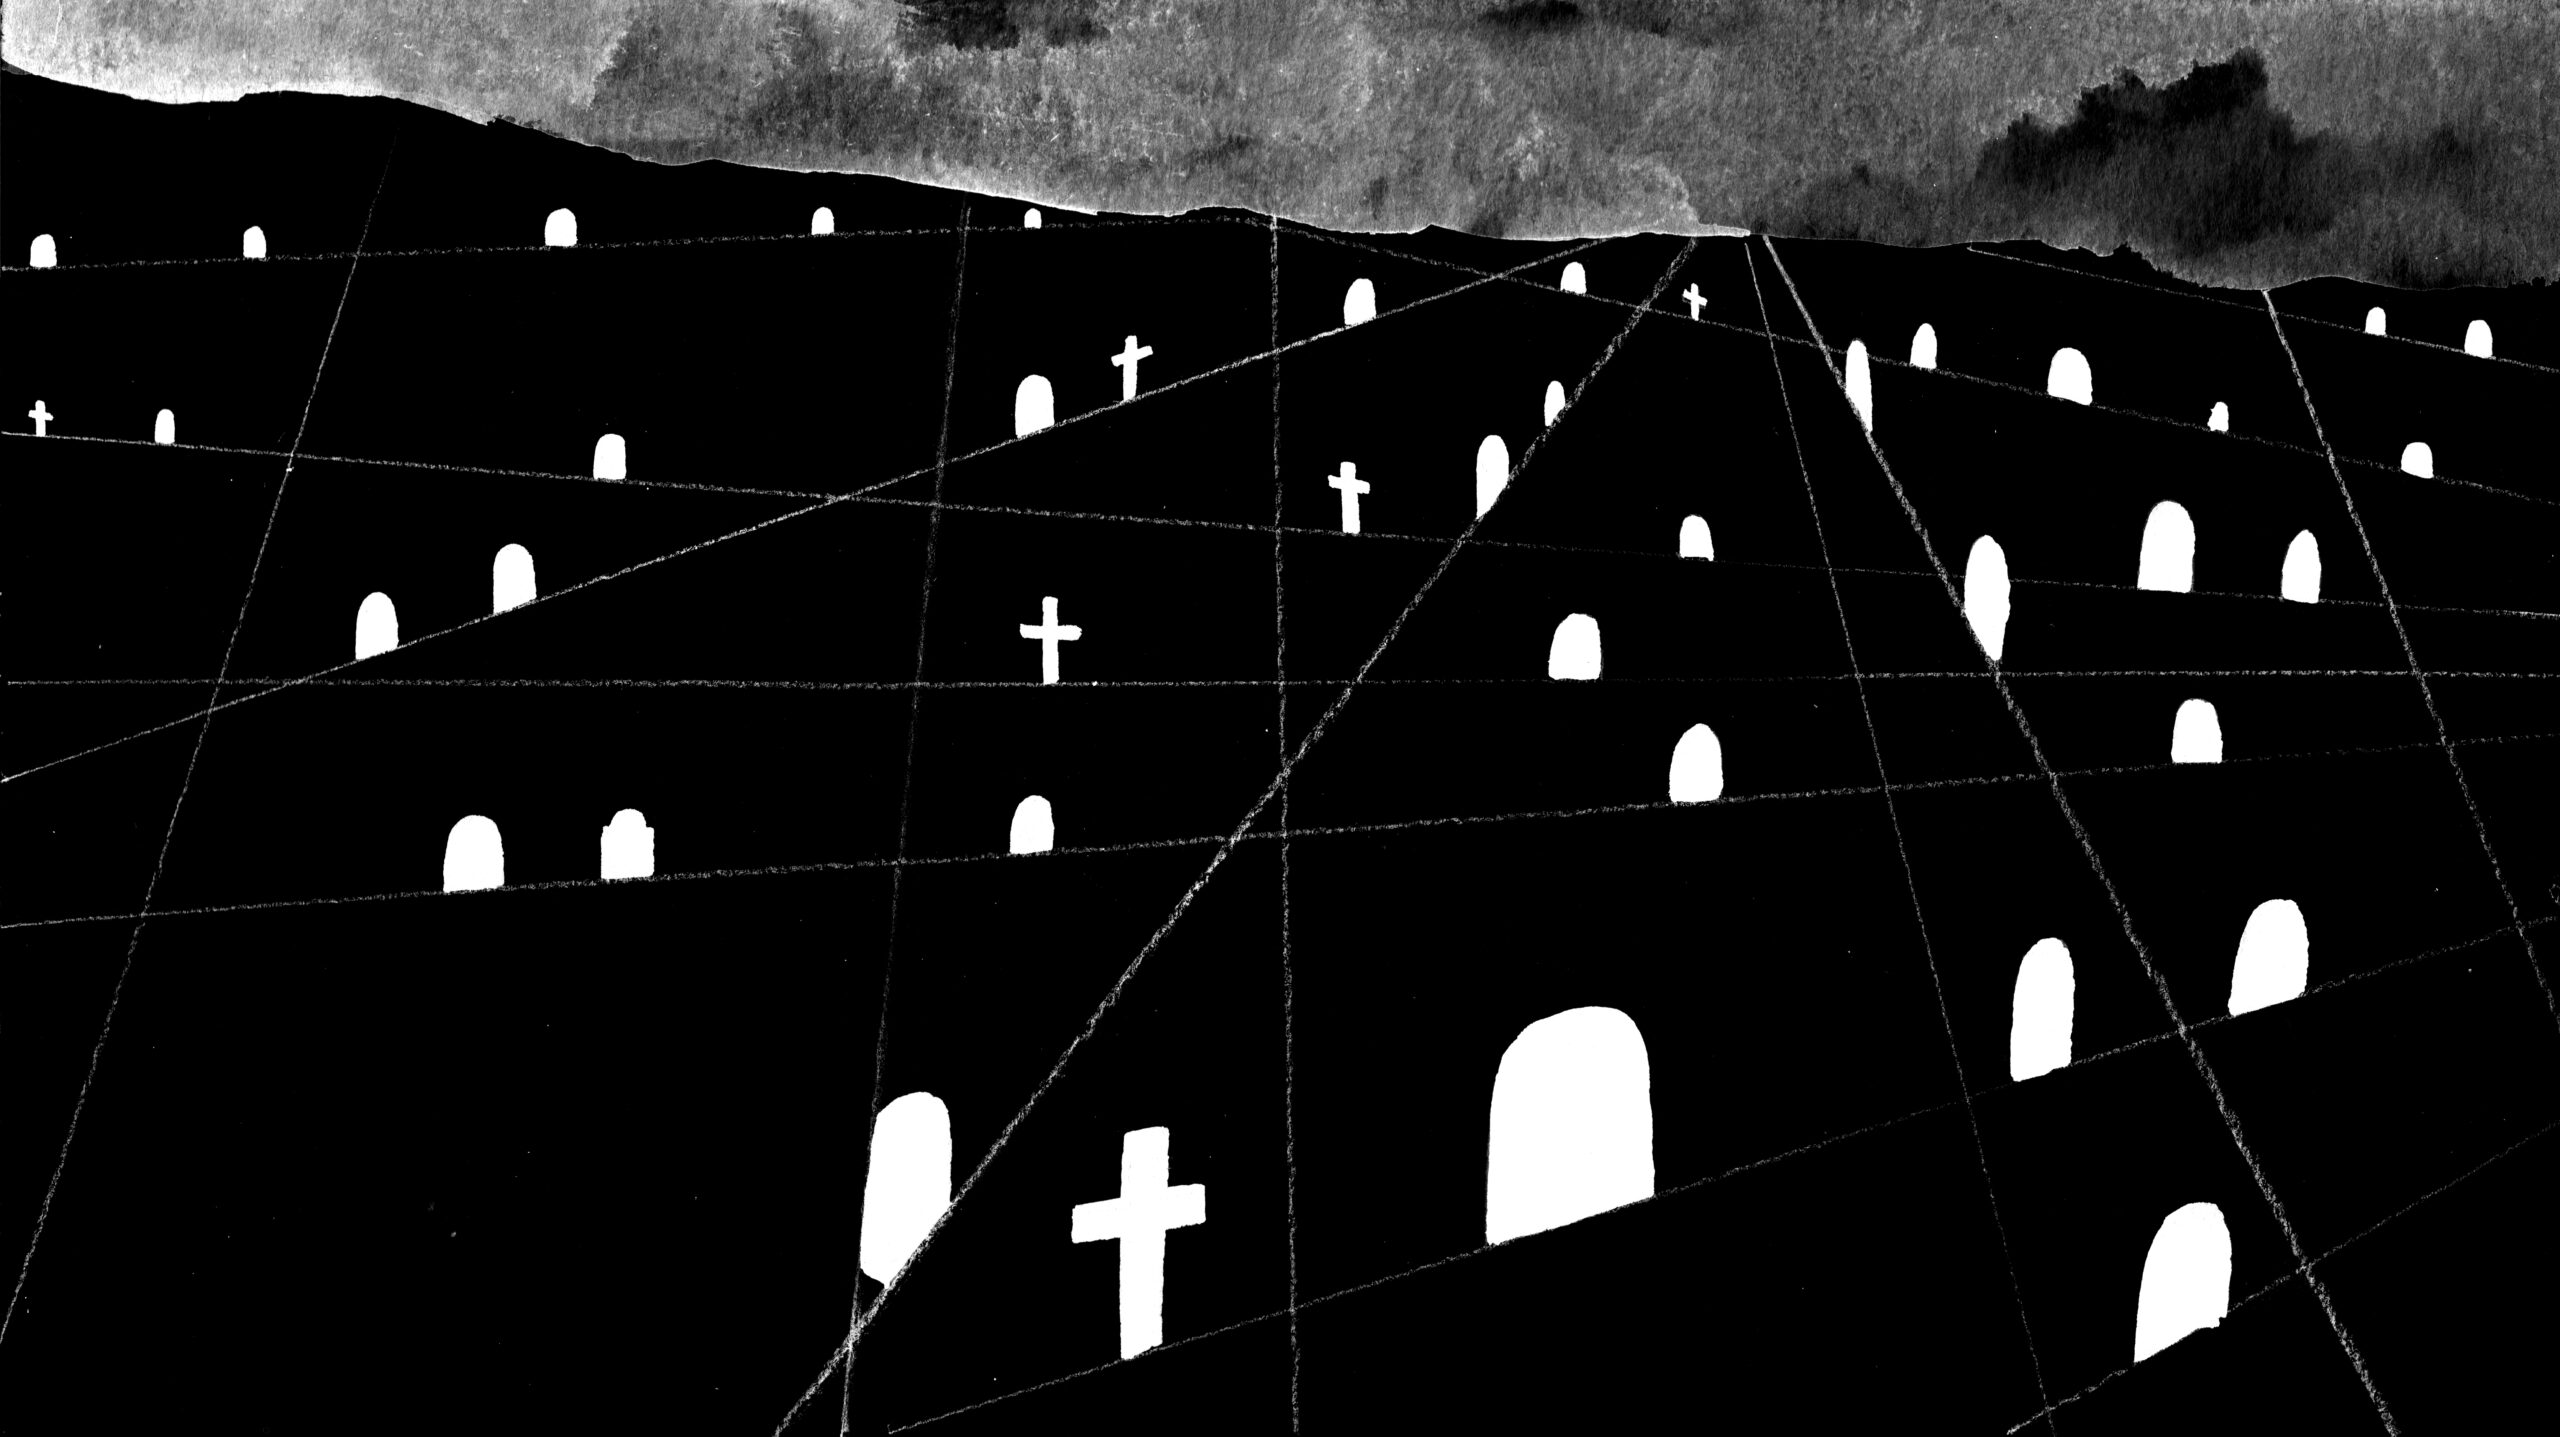 The unidentified: Unmarked refugee graves on the Greek borders